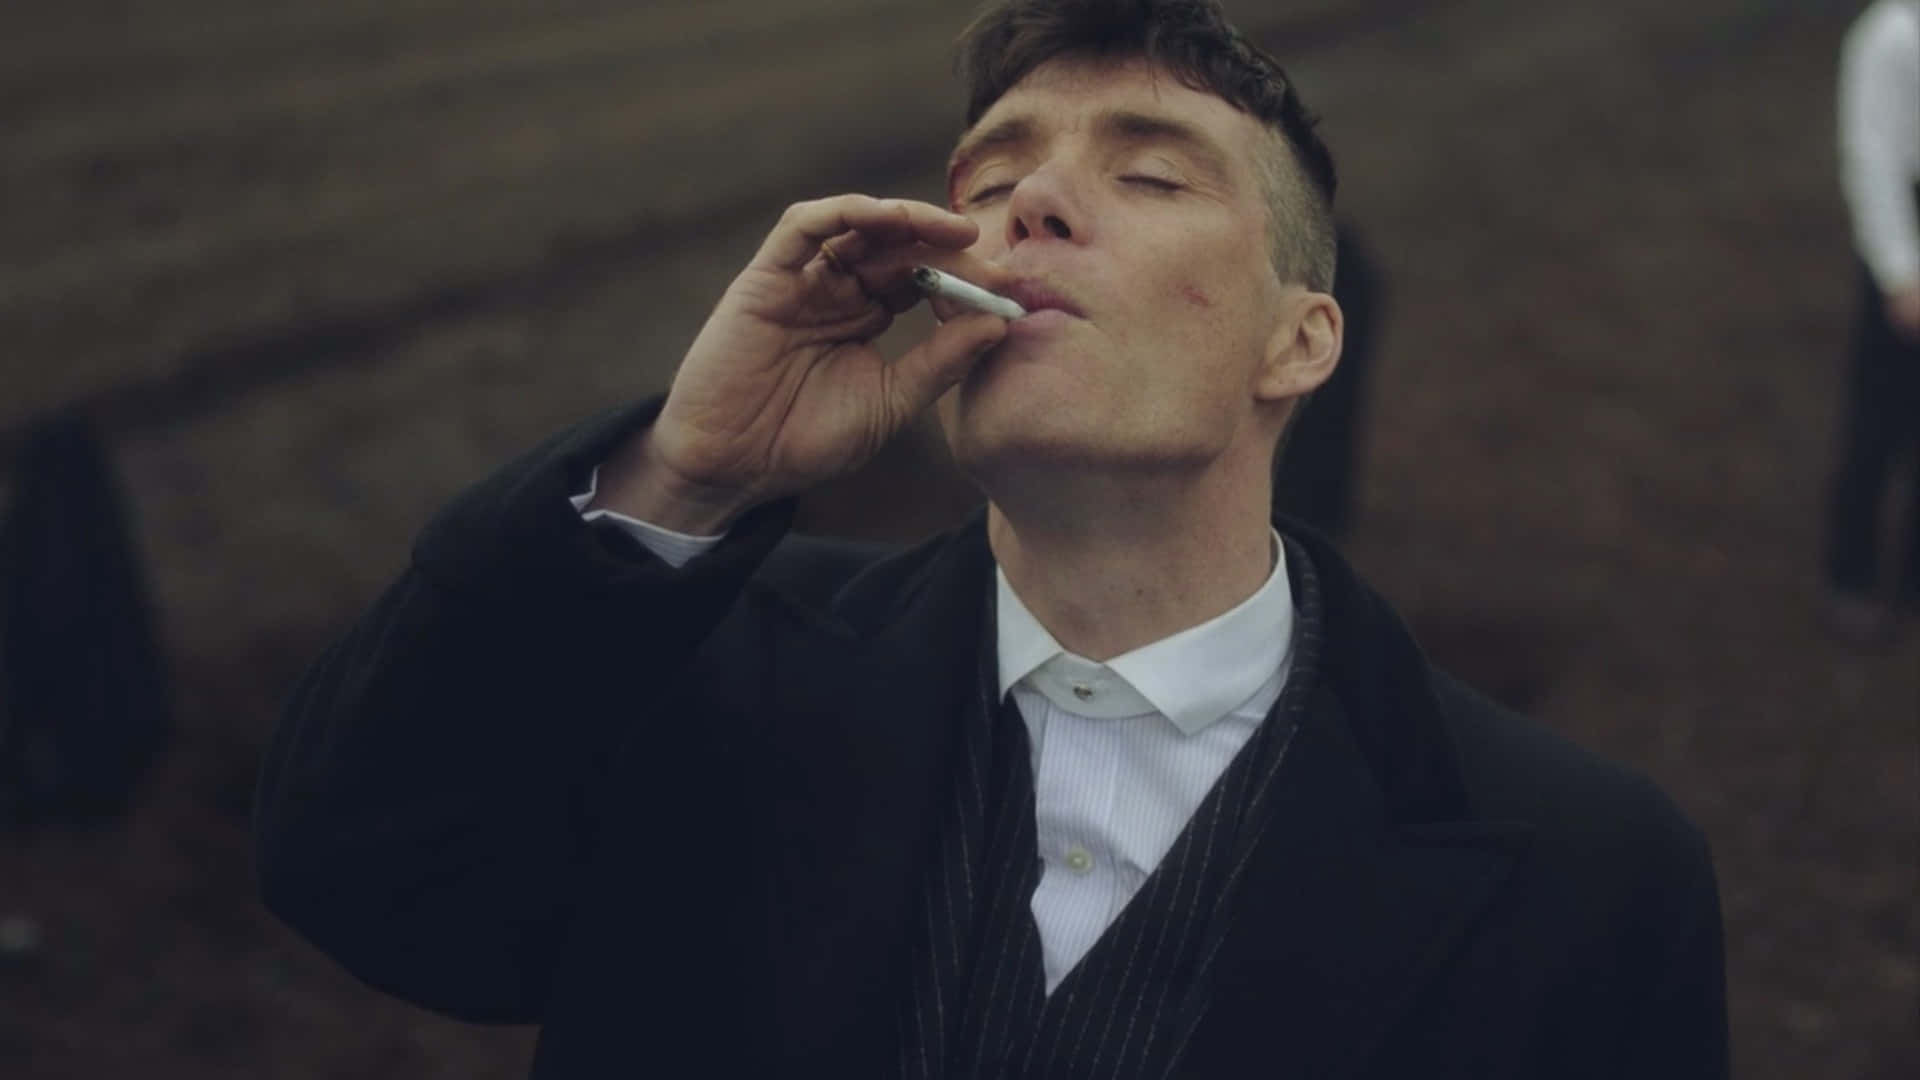 “Peaky Blinders” – the unstoppable criminal dynasty